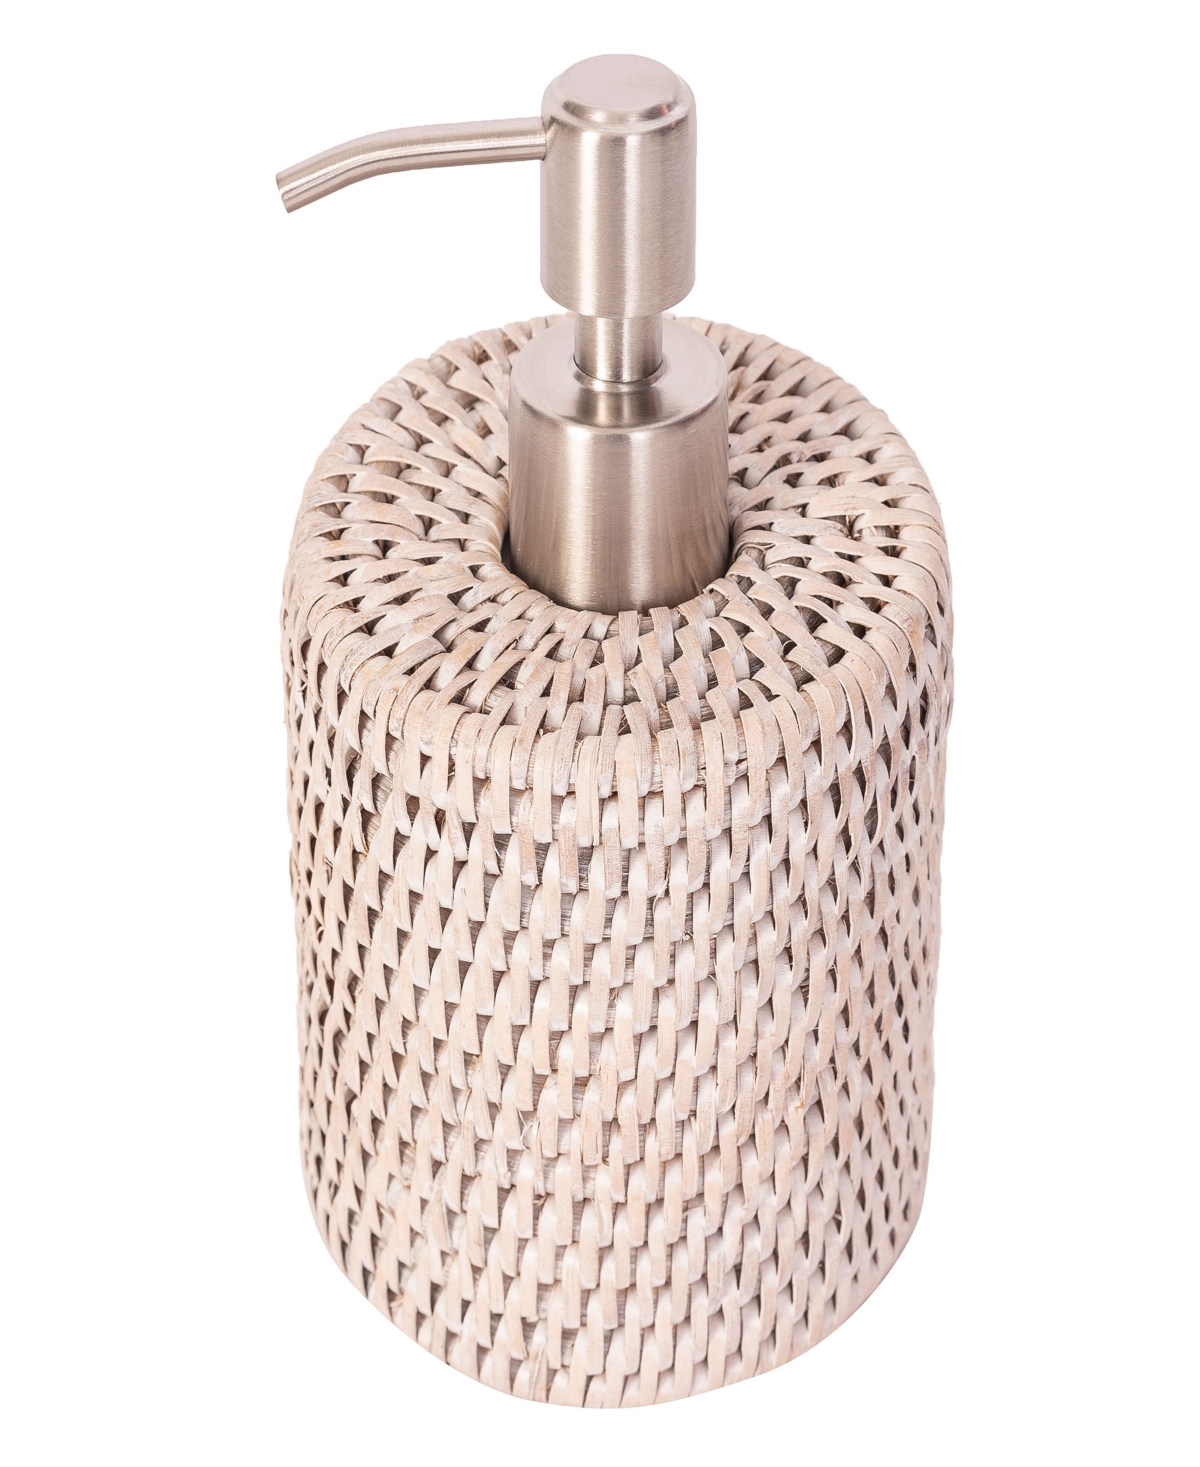 Artifacts Trading Company Artifacts Rattan Stainless Steel Polished Finish Soap Pump Dispenser In White Wash